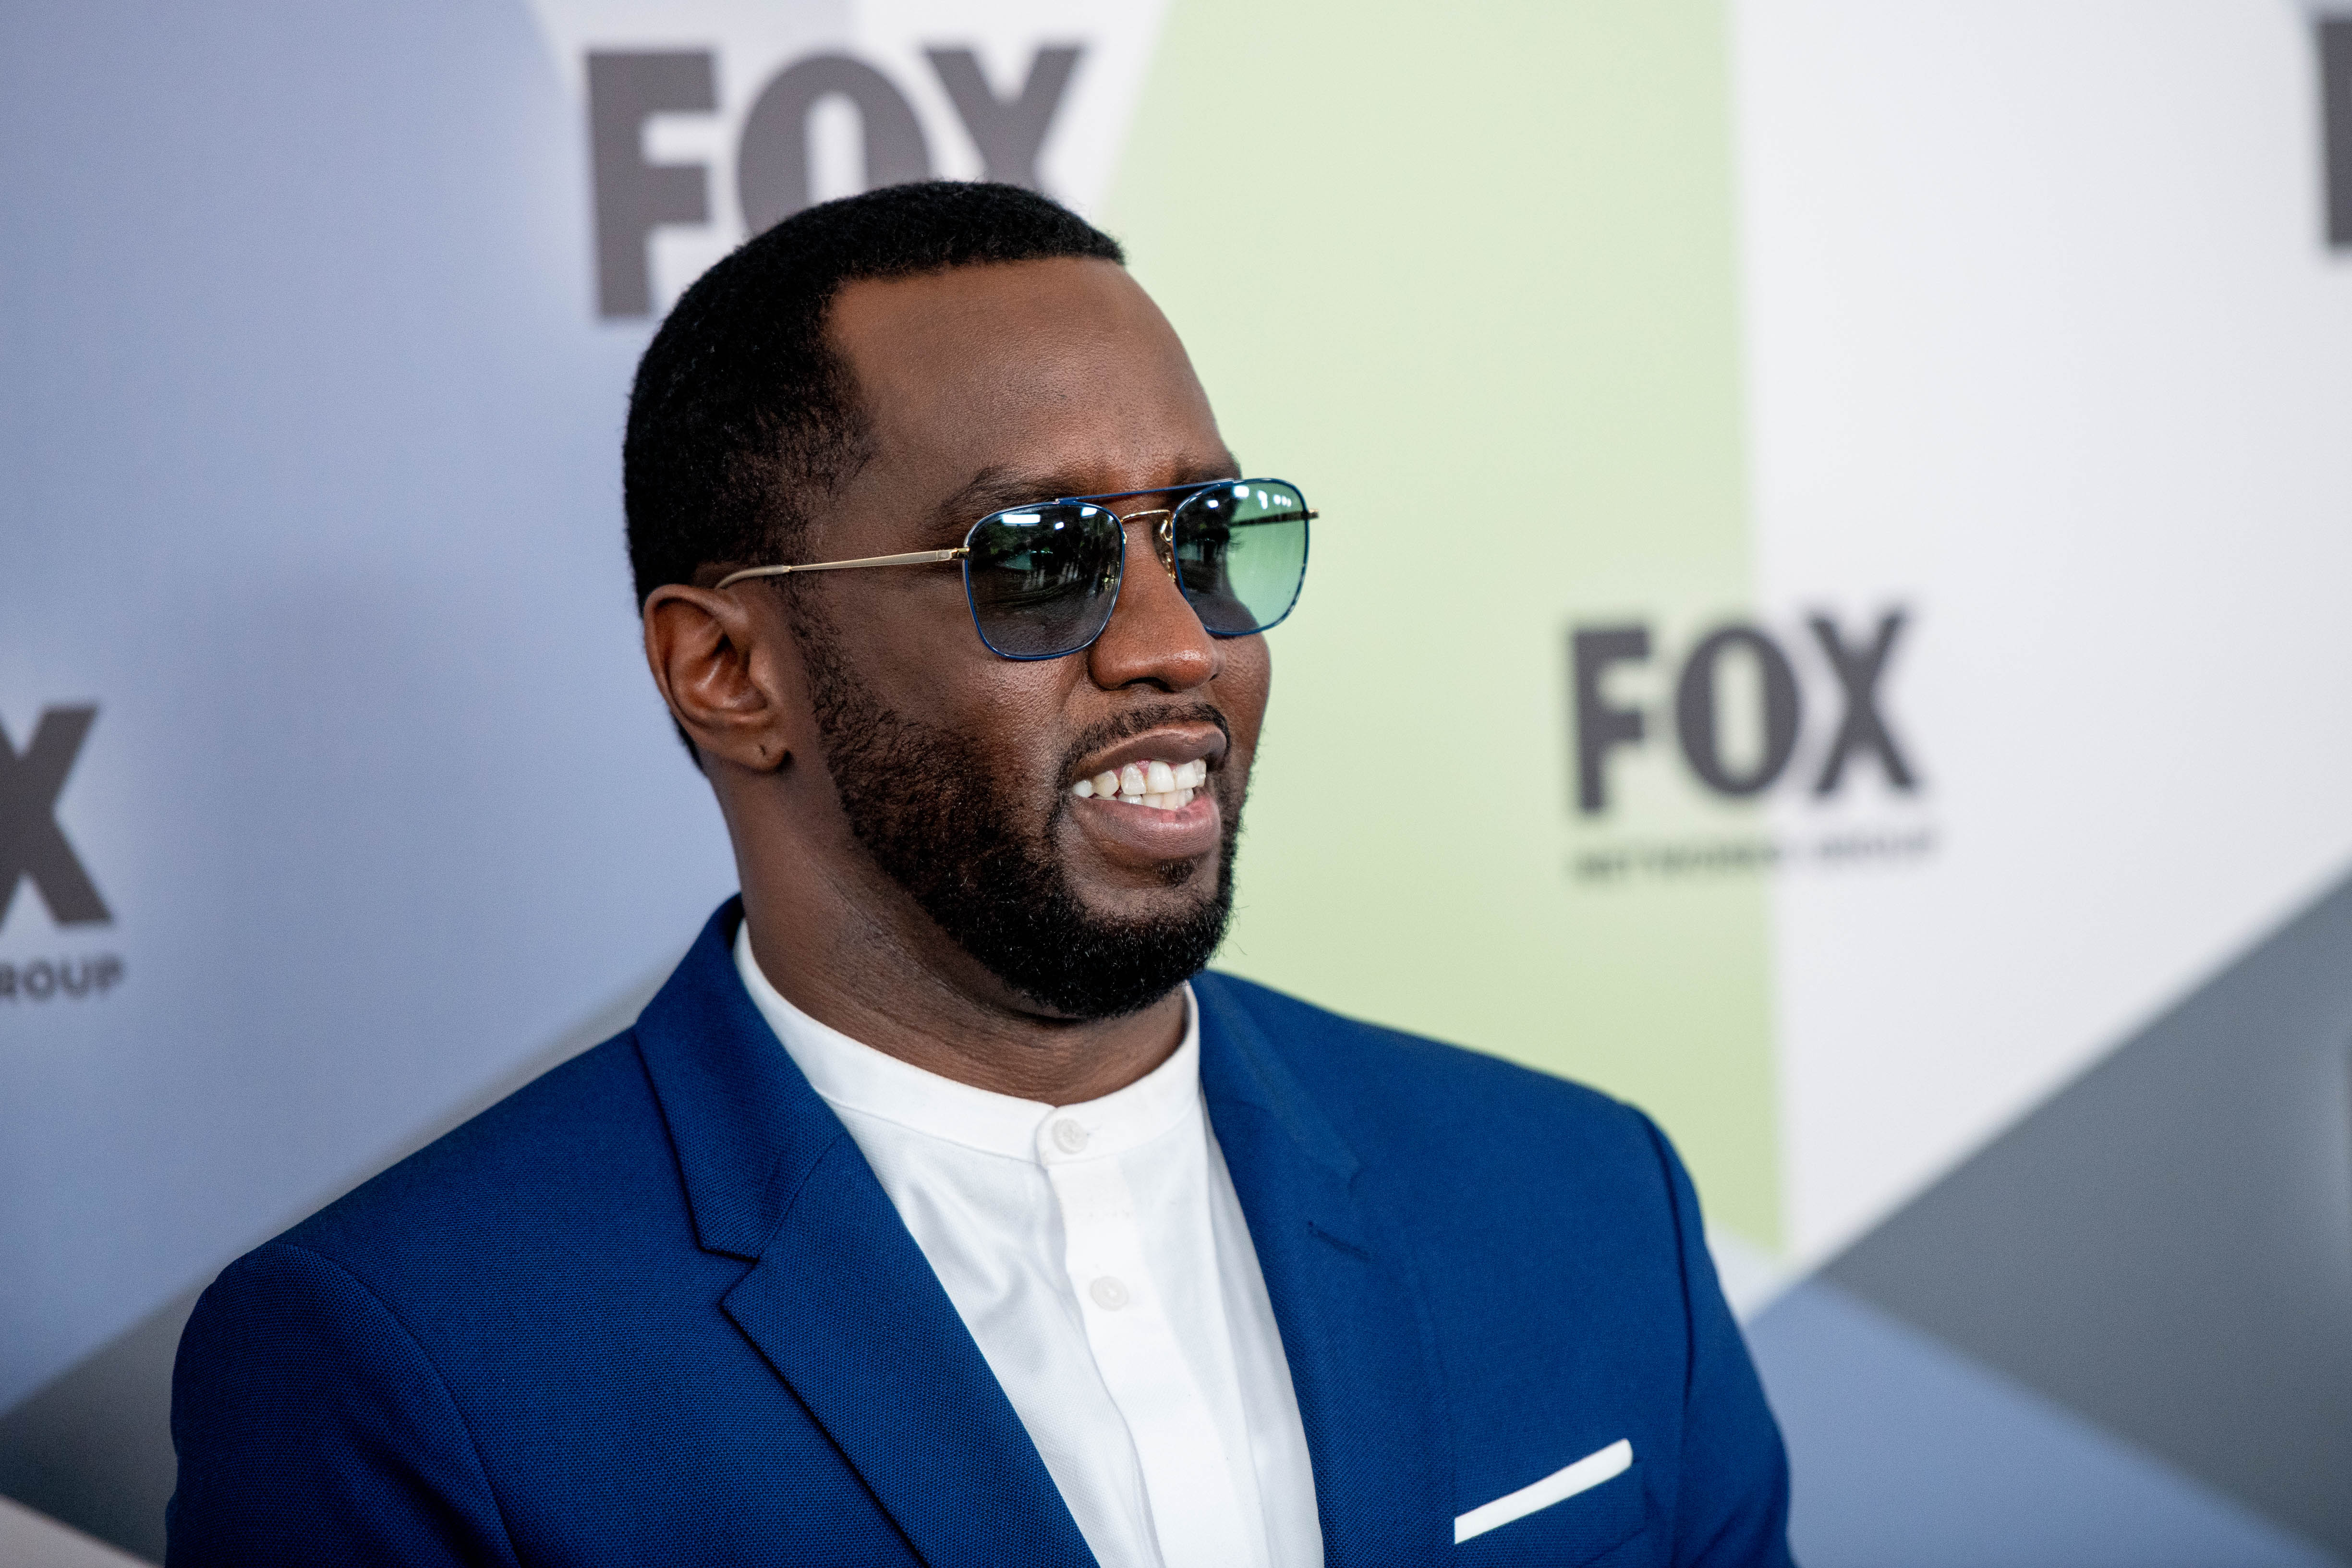 Diddy at the 2018 Fox Network Upfront in New York. | Photo: Getty Images